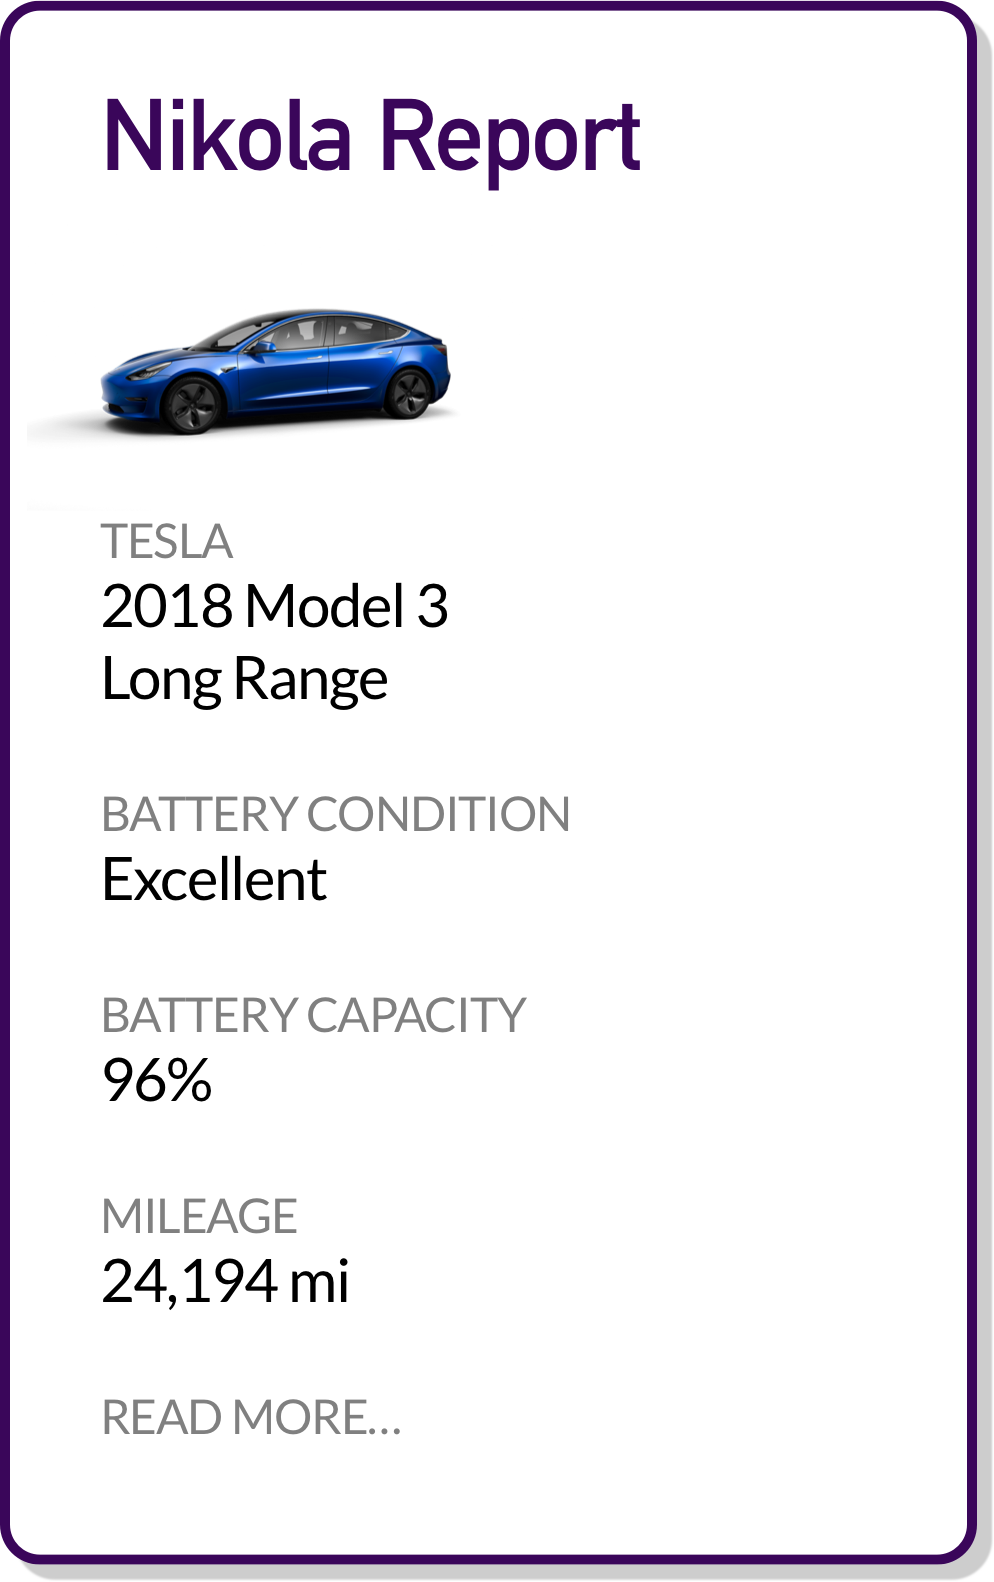 Nikola Report image with battery health, mileage, charge capacity, and more.